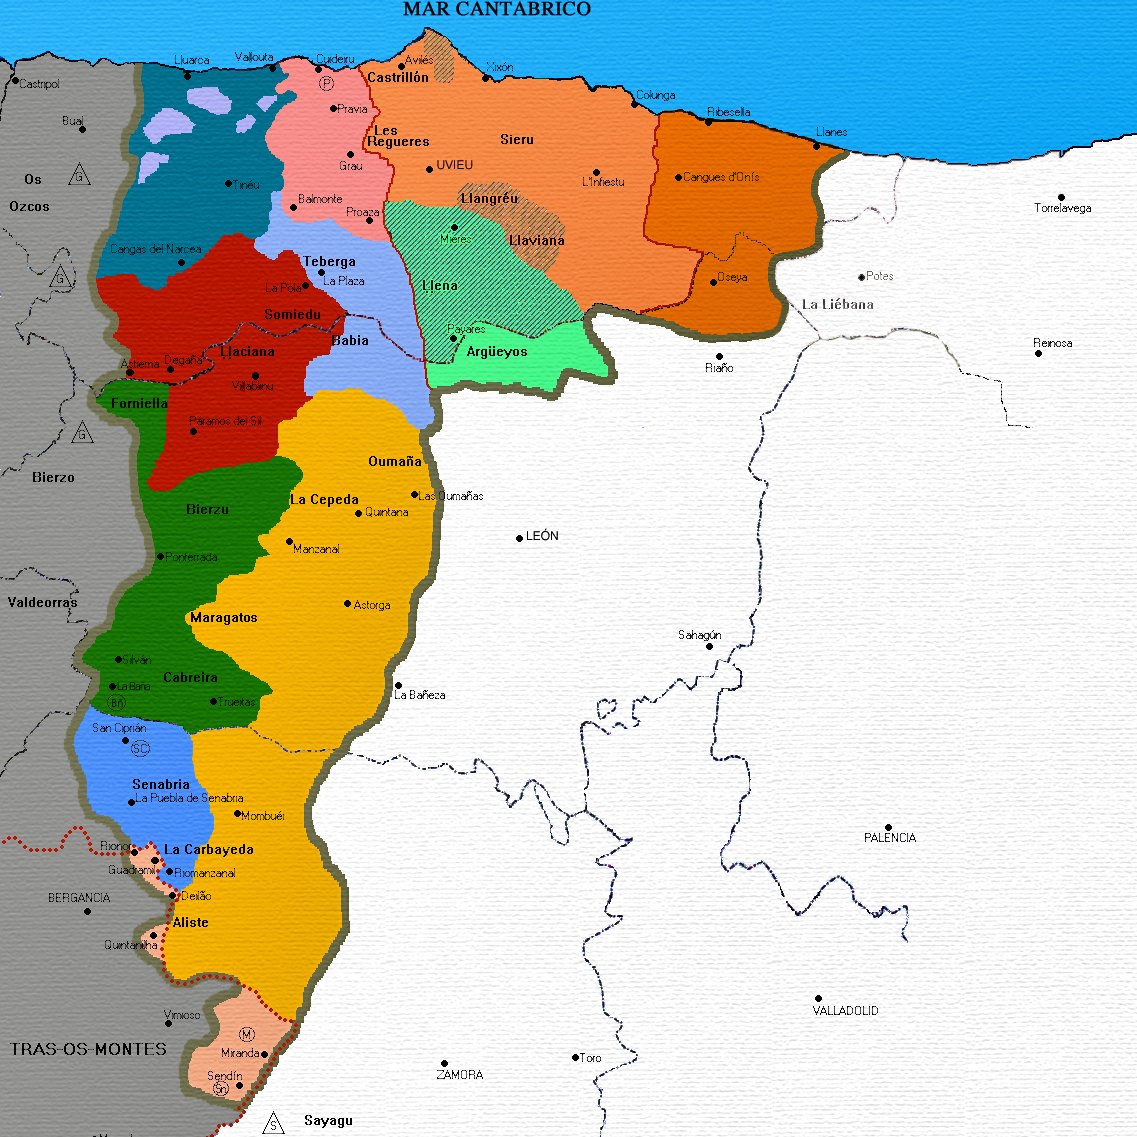 The Asturian castilian is influenced by the bable language, spoken in those areas: